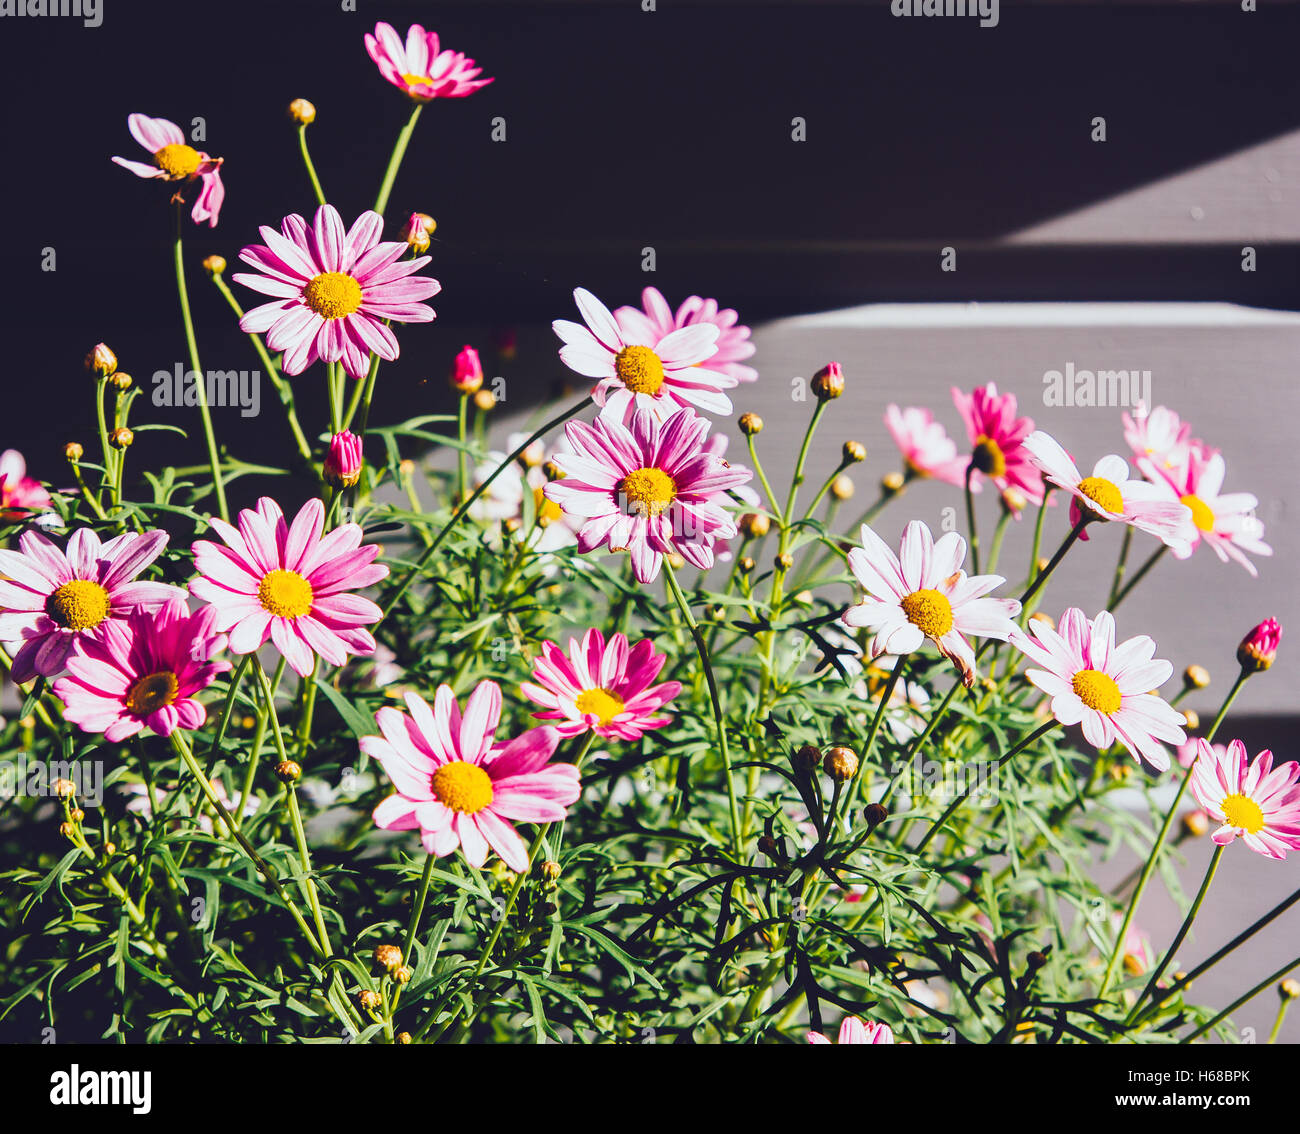 Pink daisies in bloom. Stock Photo